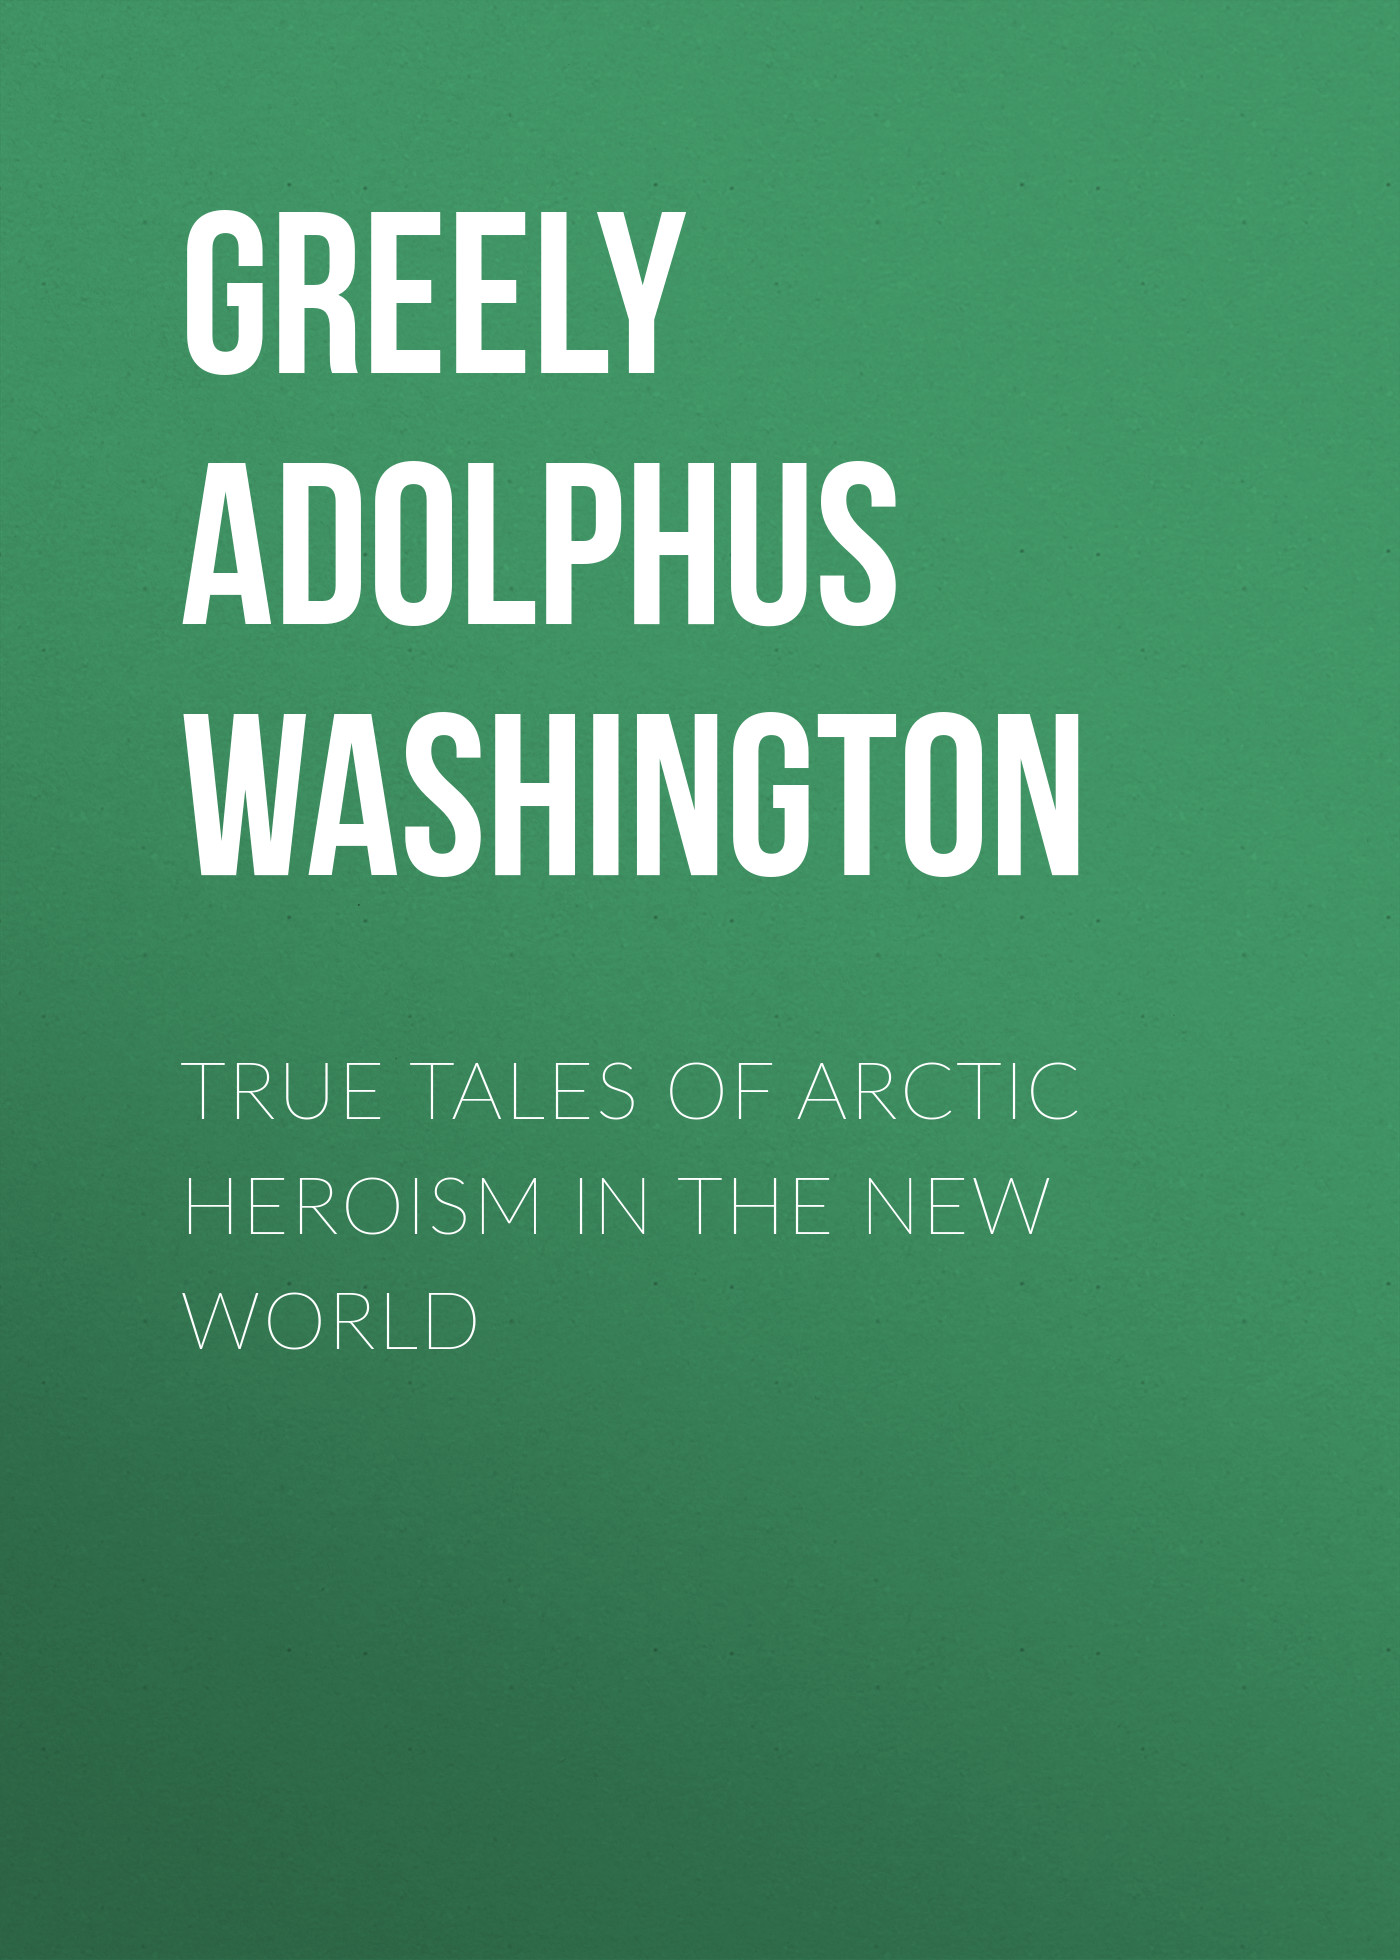 True Tales of Arctic Heroism in the New World